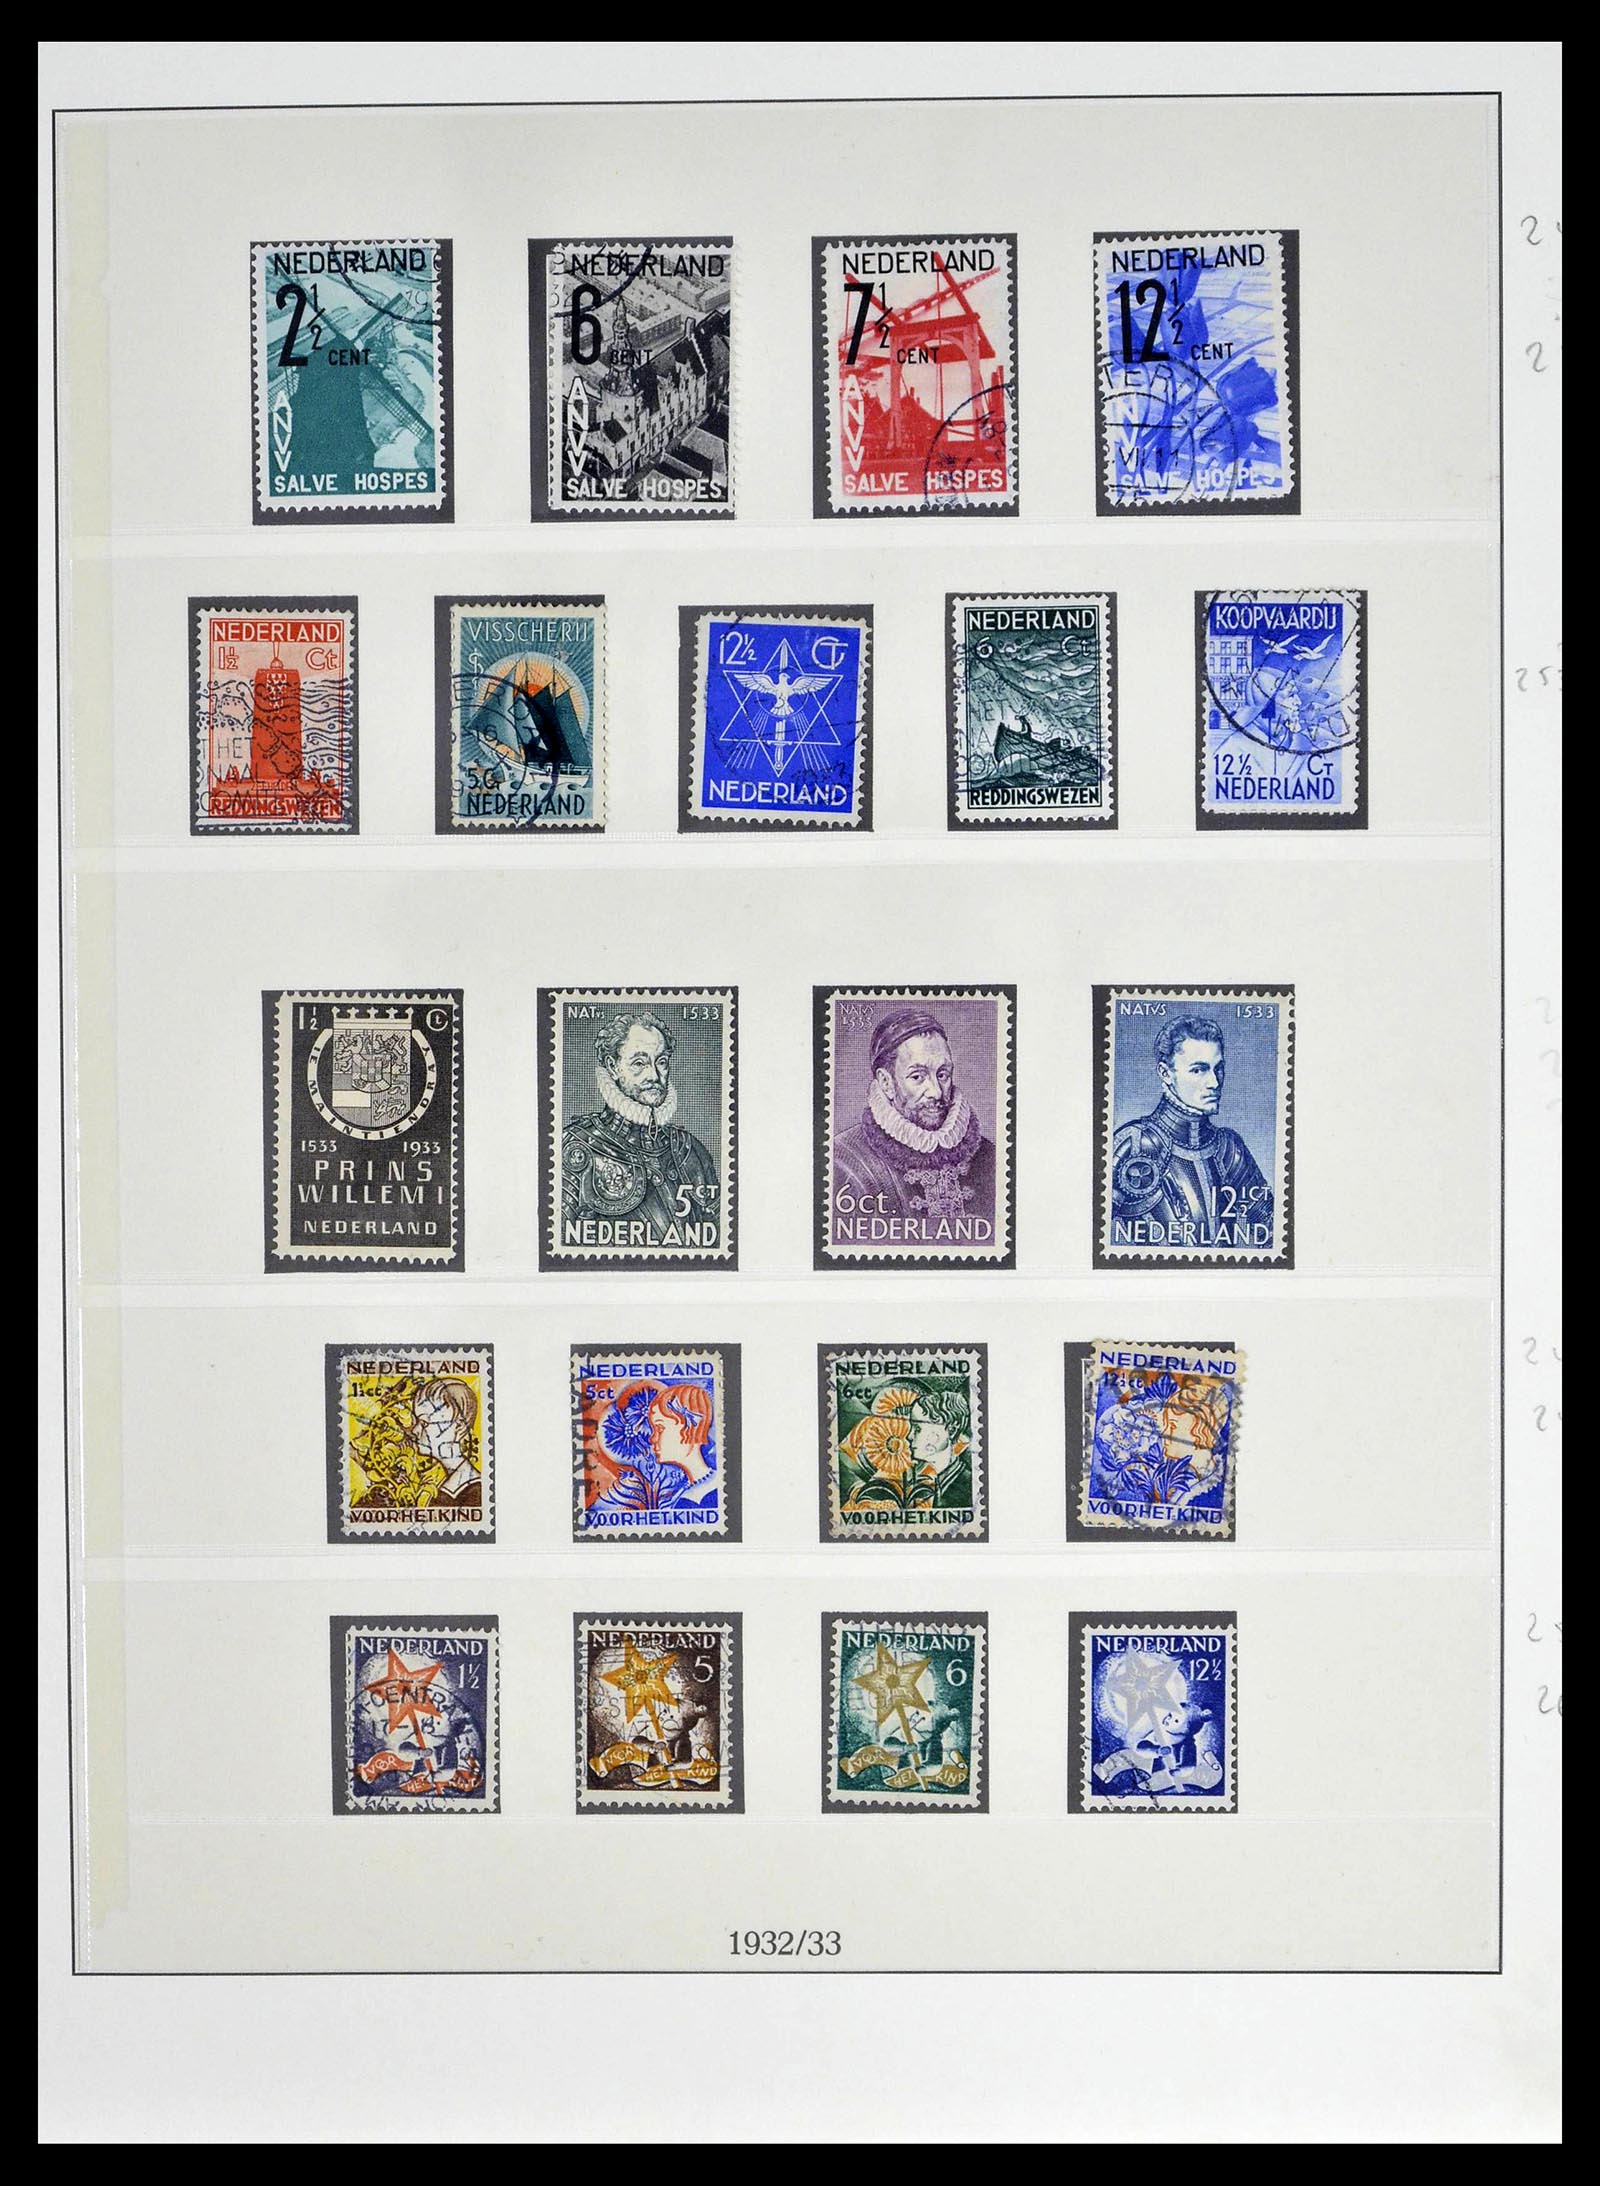 39221 0018 - Stamp collection 39221 Netherlands 1852-1966.